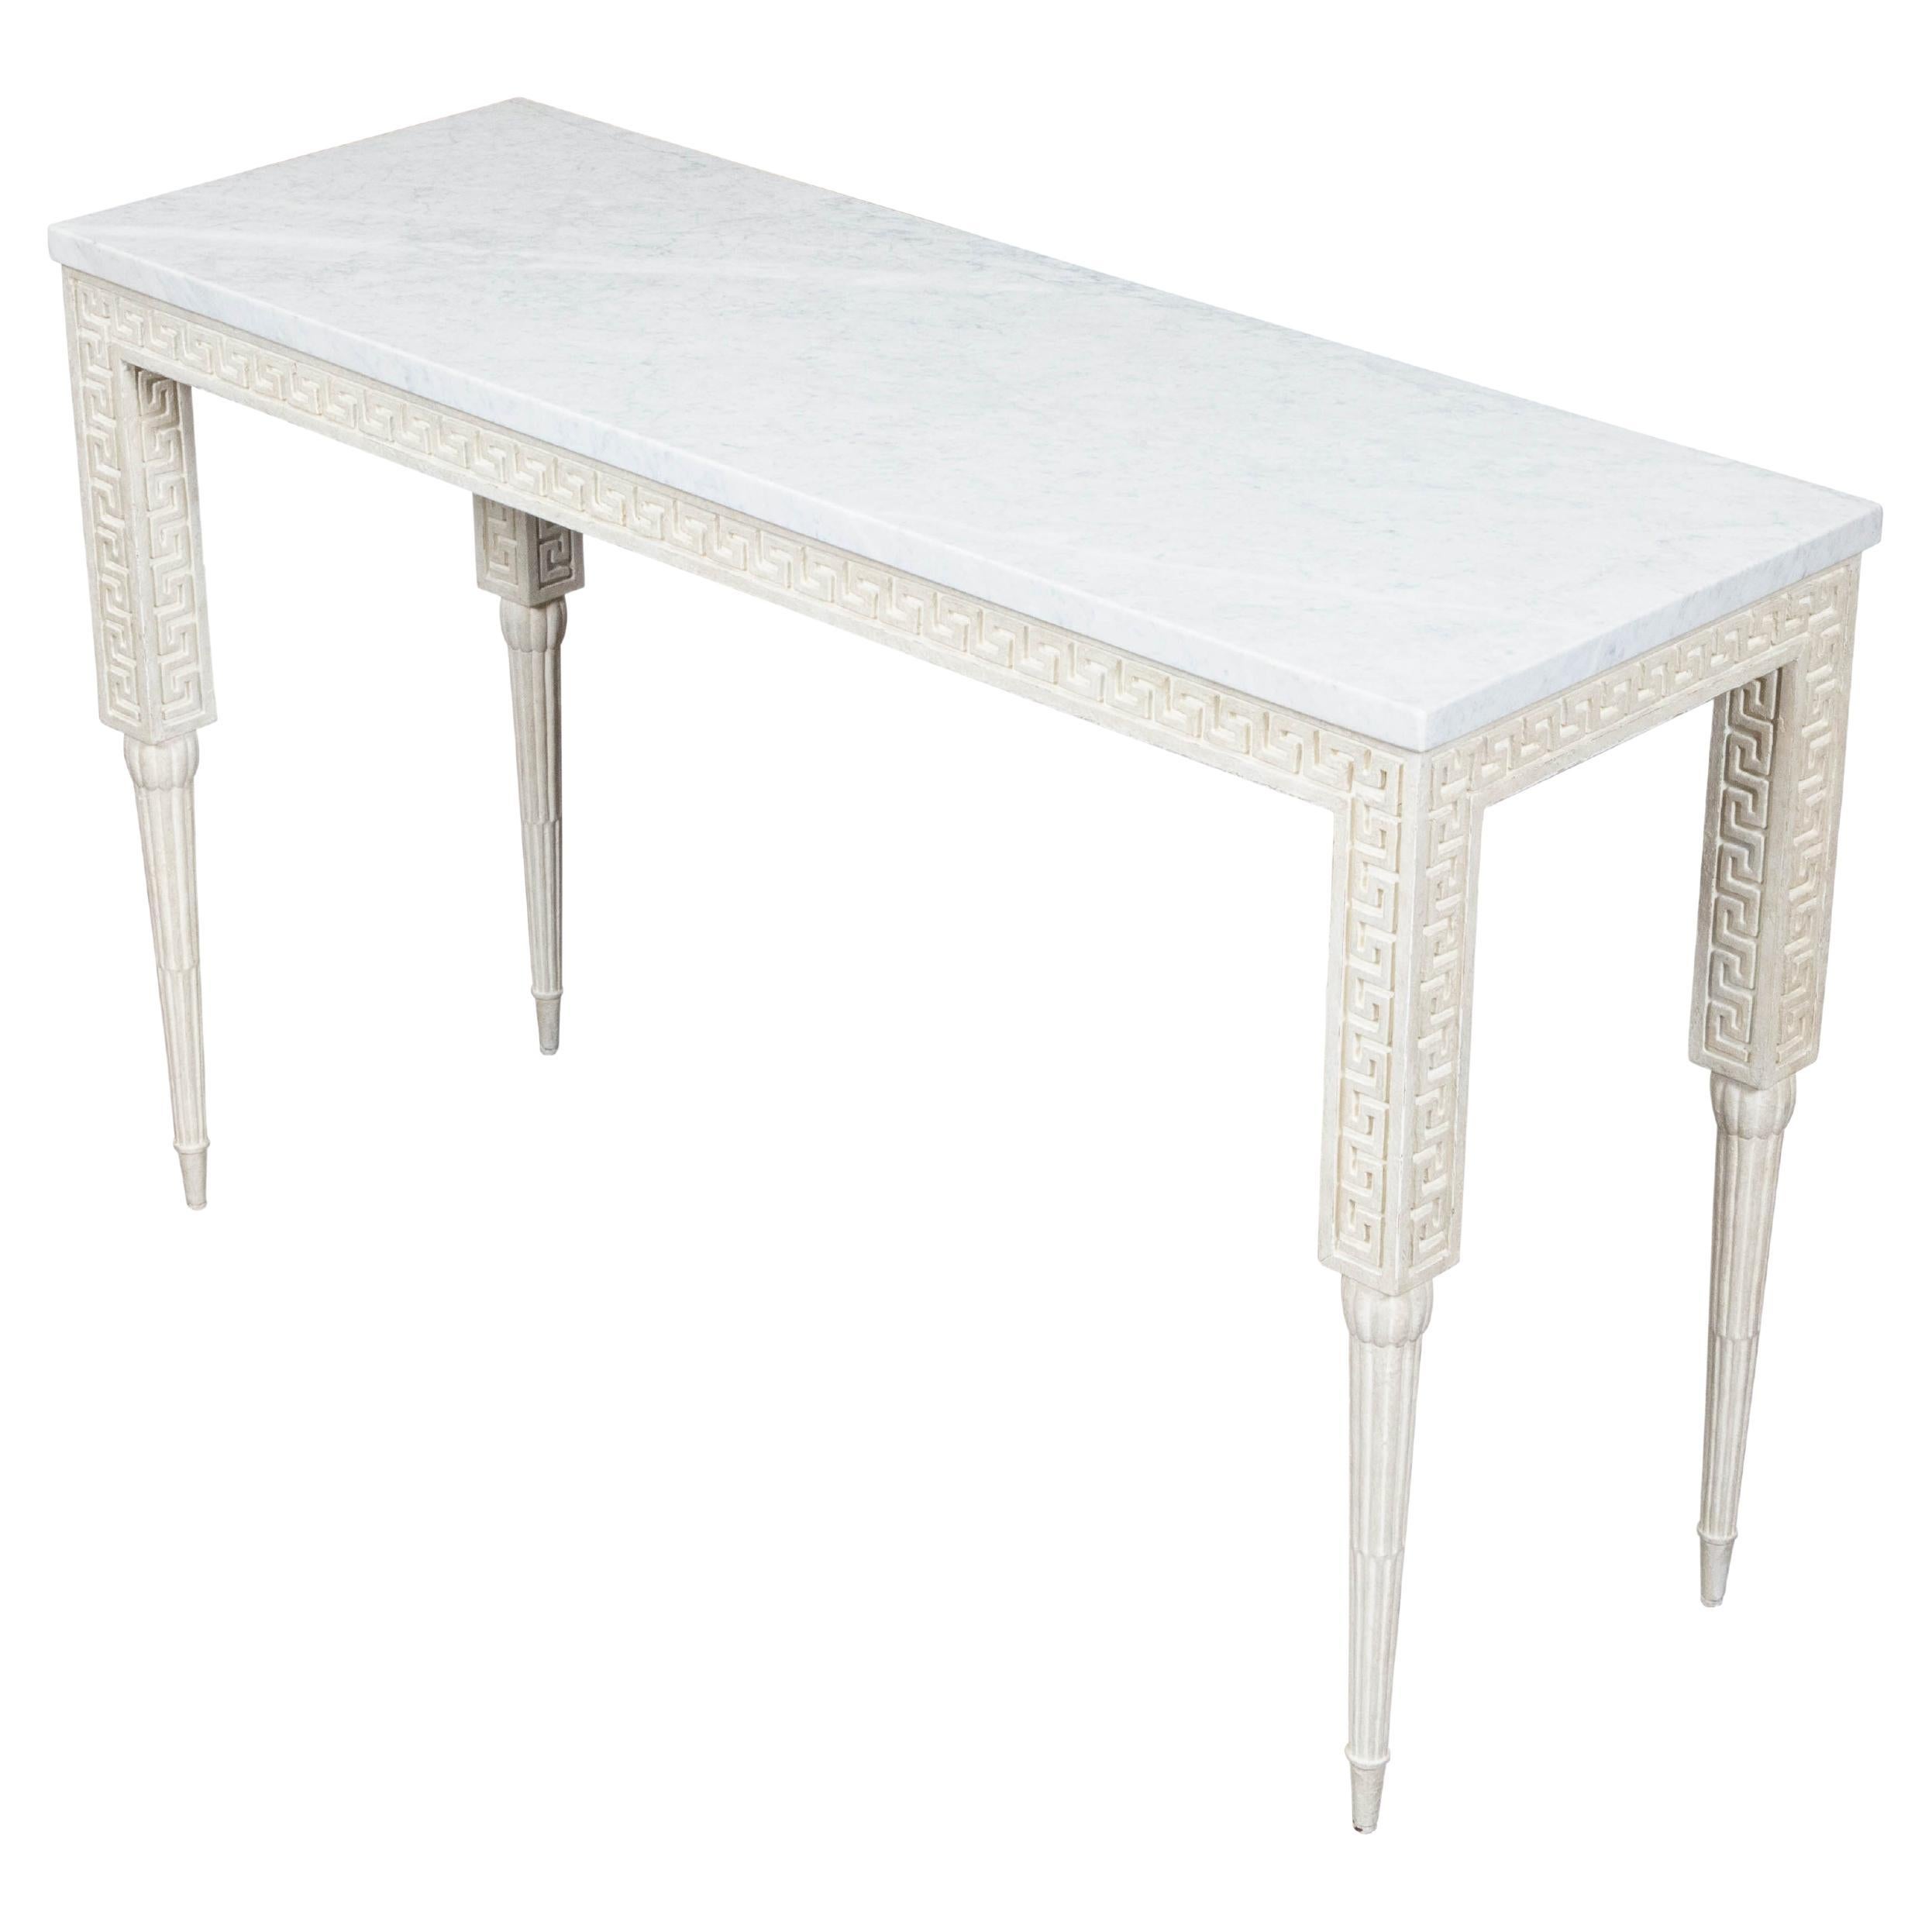 Italian Midcentury Console Table with White Marble Top and Carved Greek Key